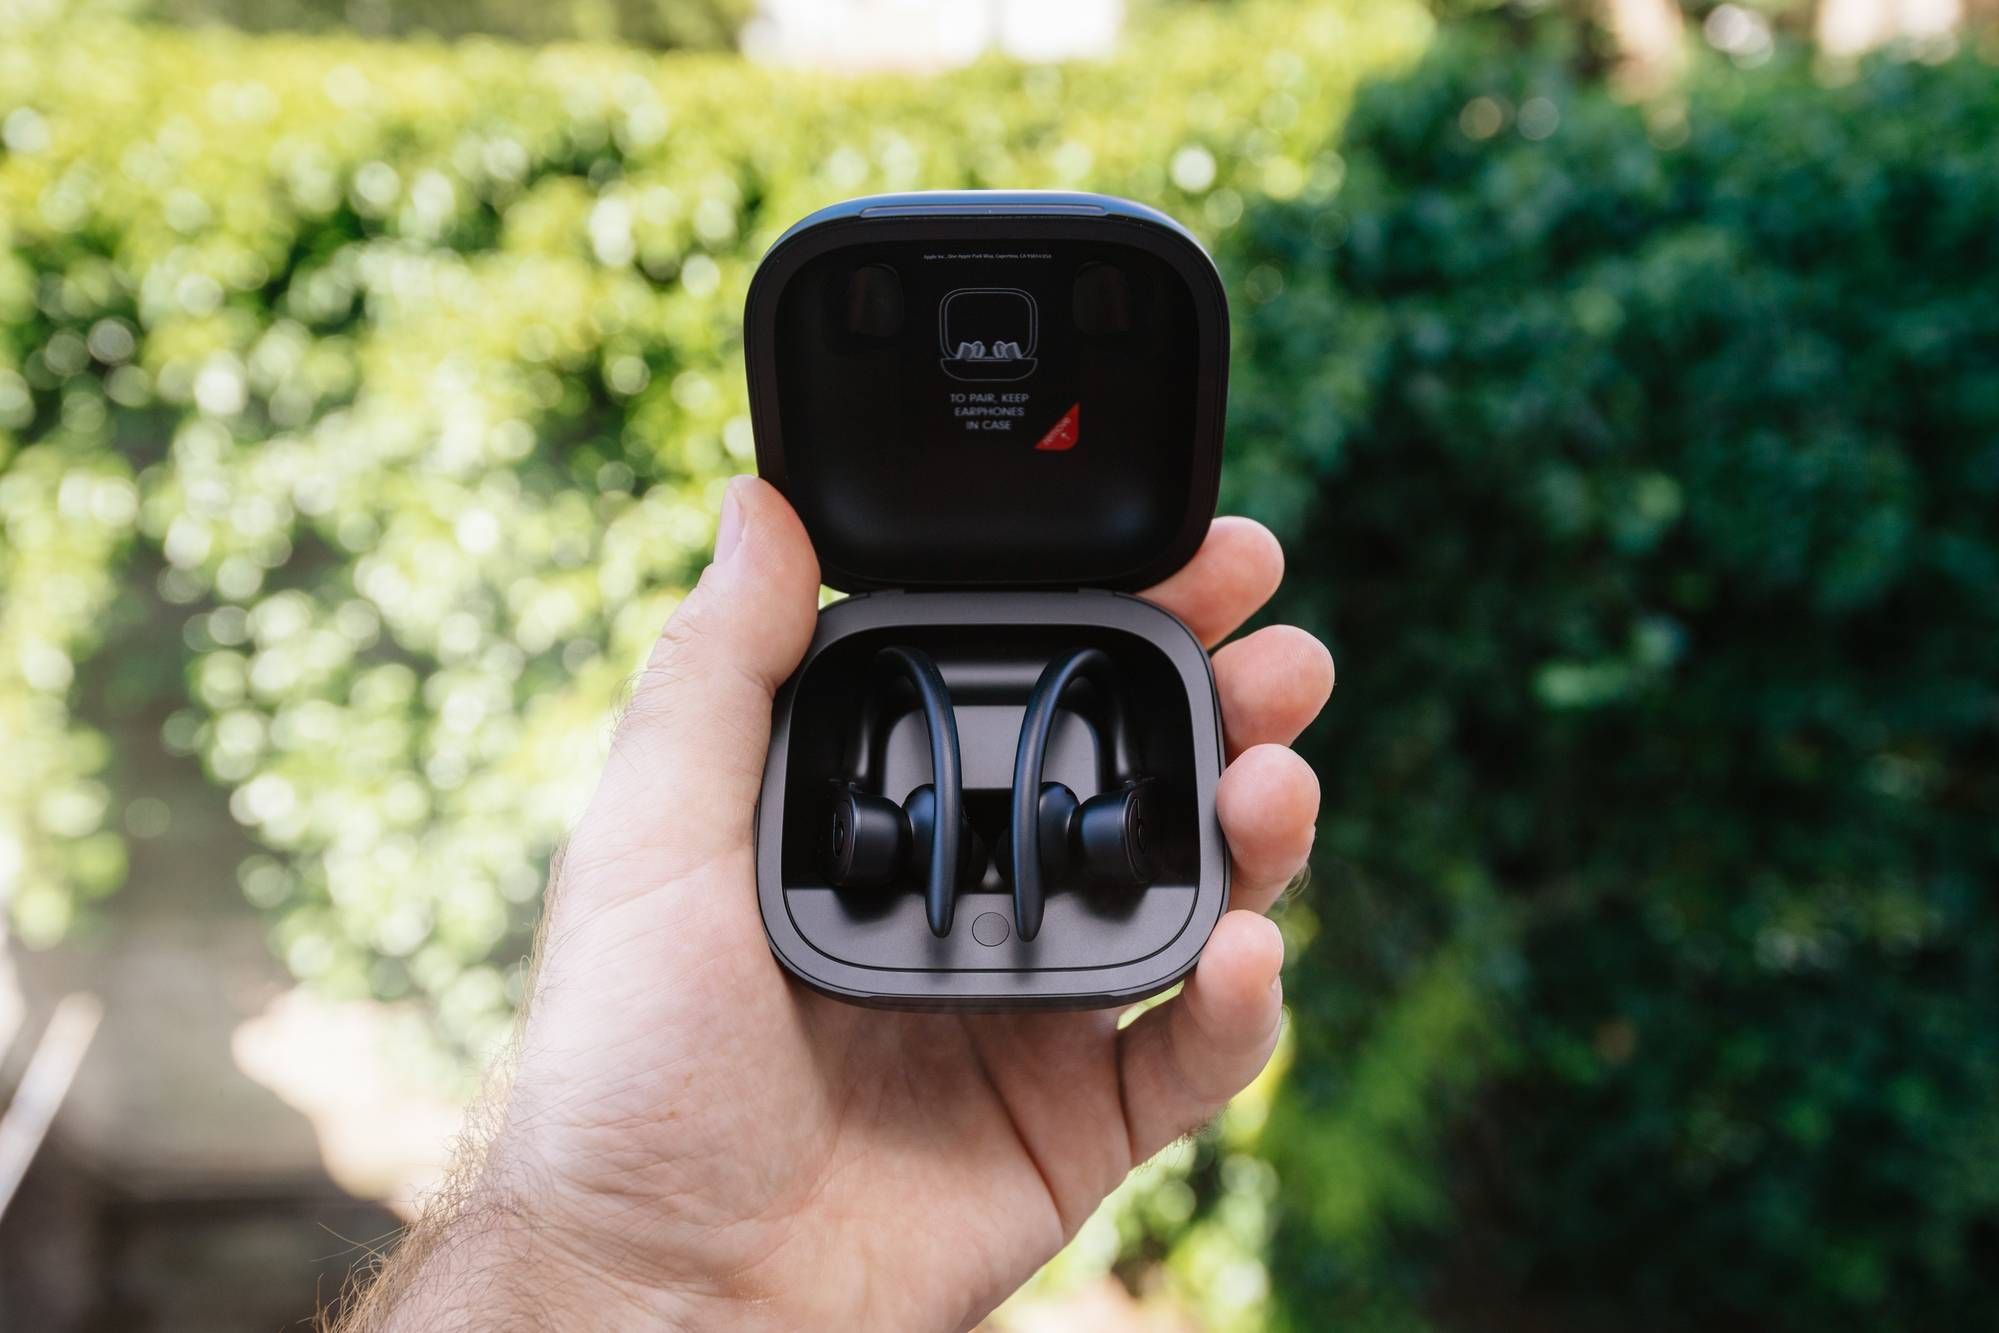 Powerbeats2 battery life allegedly disappoints wireless headphone users.